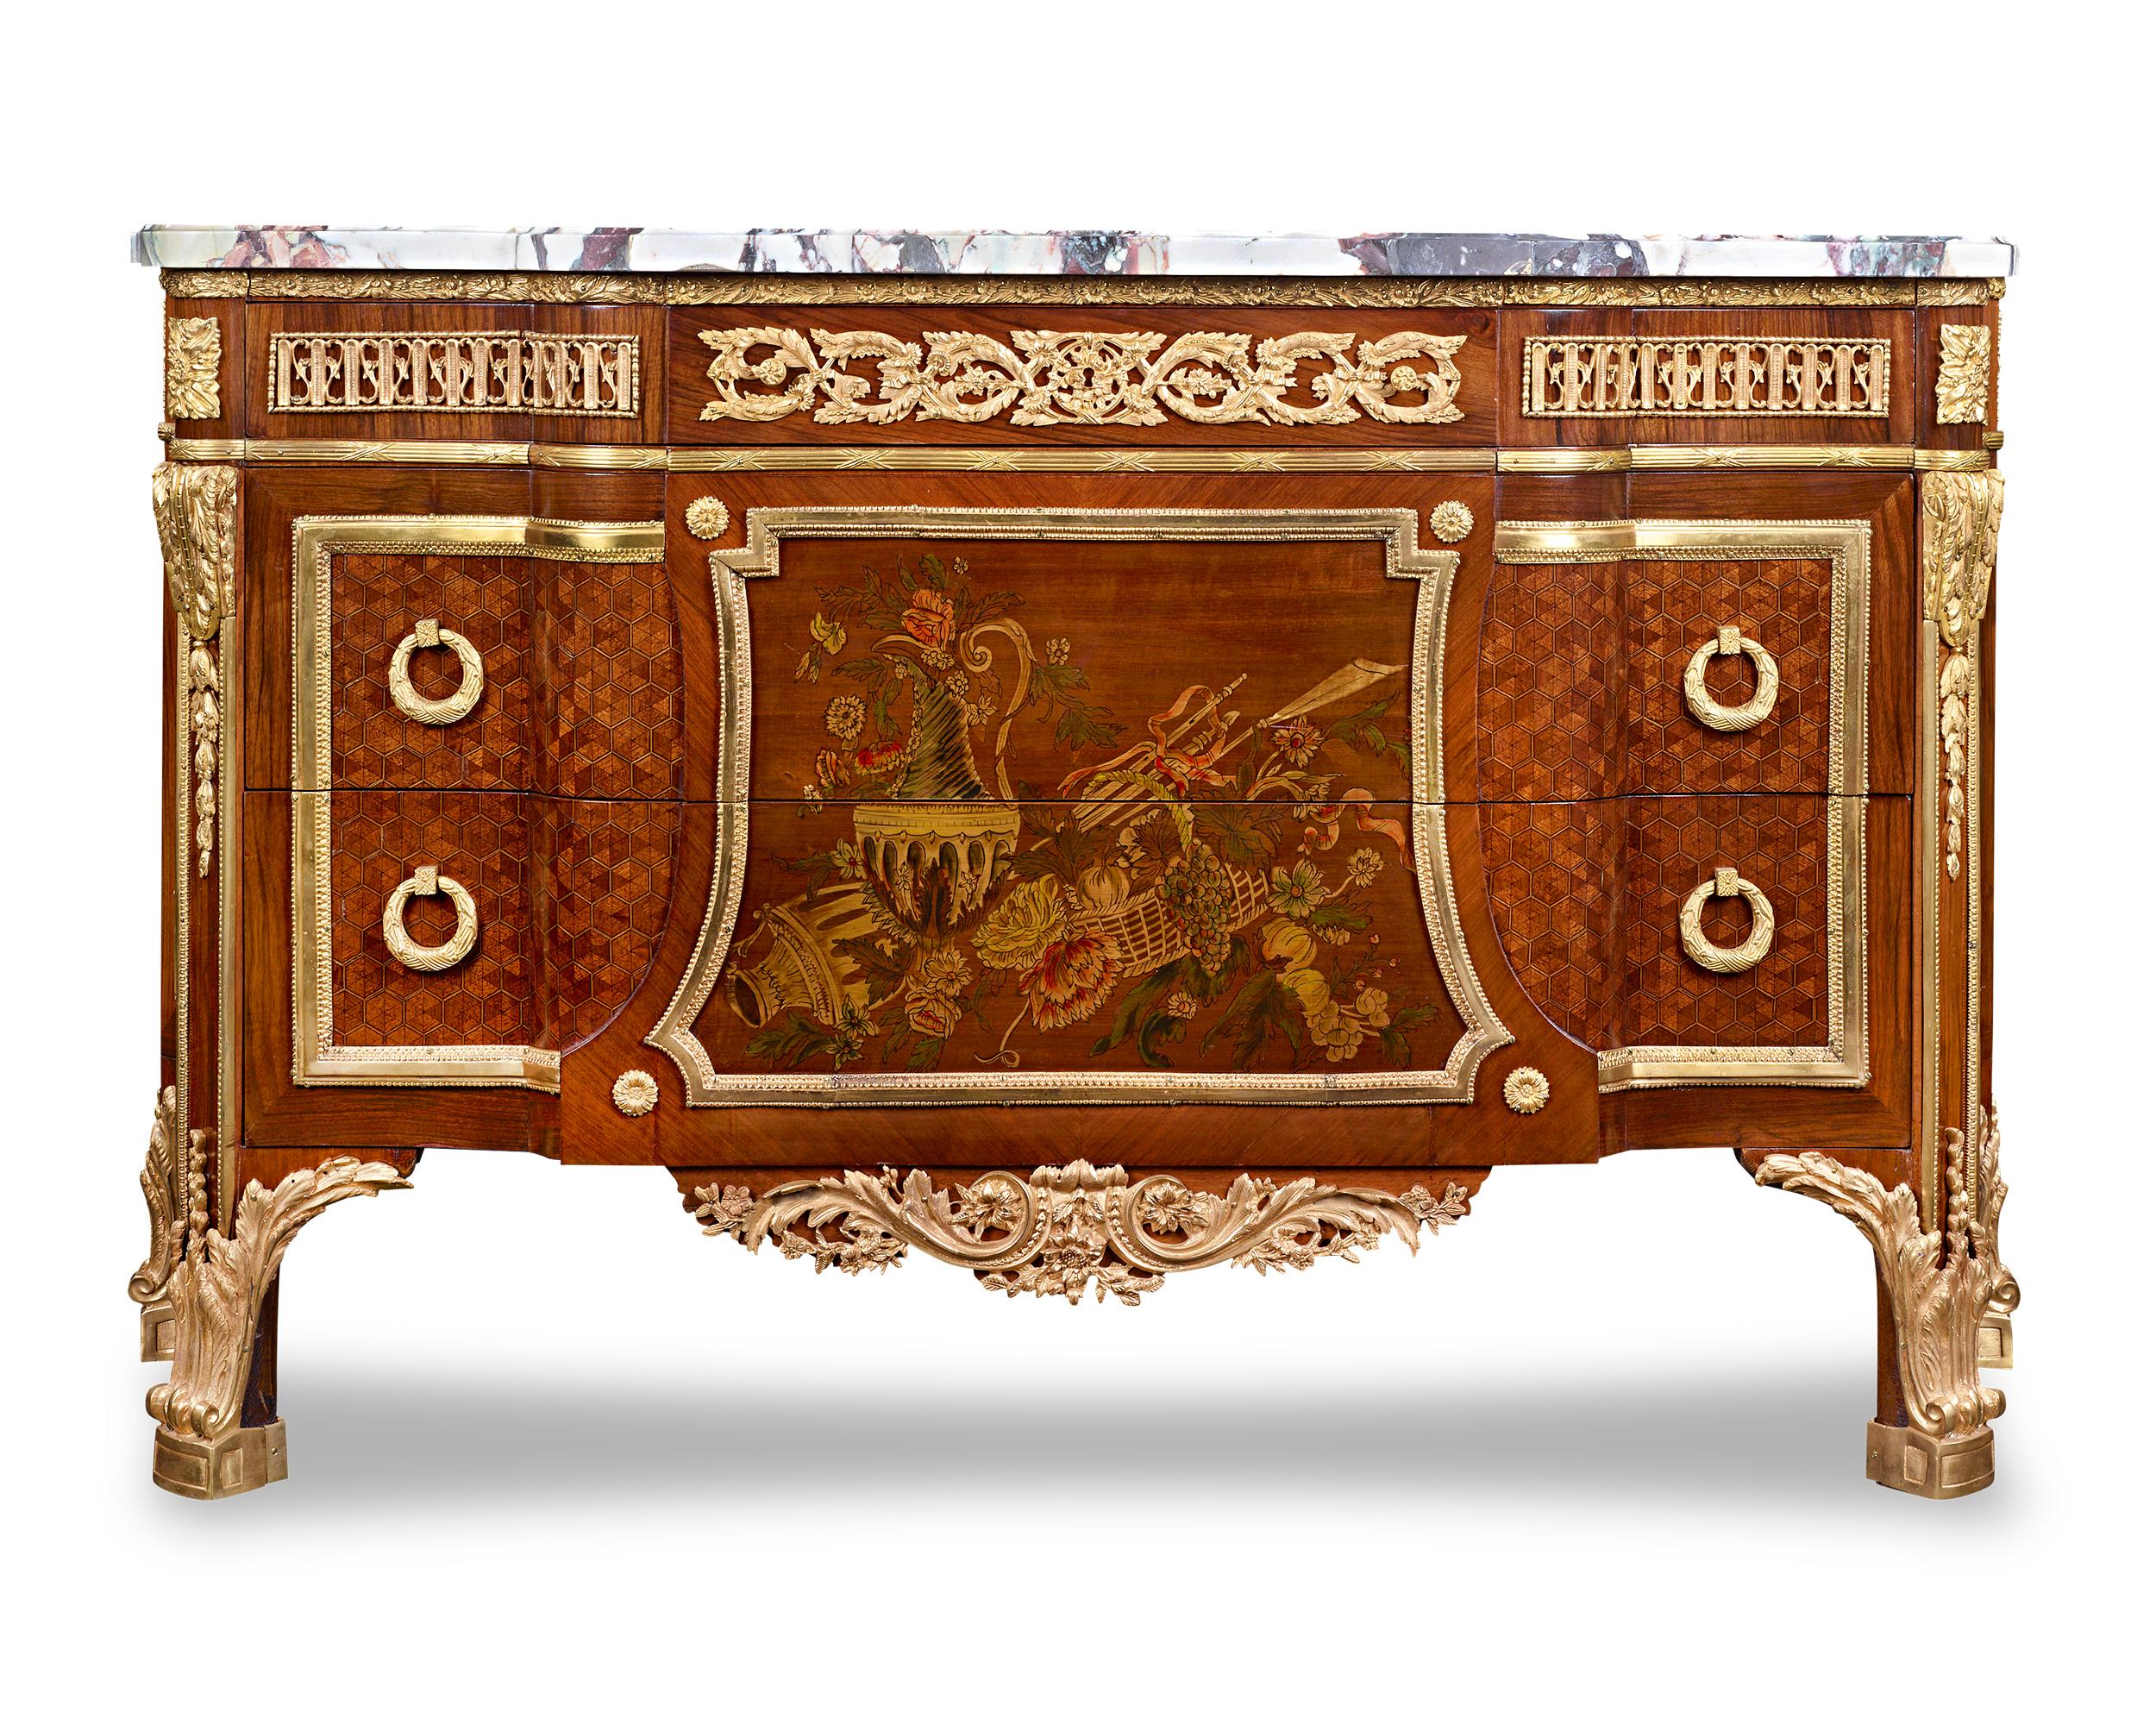 This magnificent pair of French commodes captures the refinement of the Louis XVI style. A highly detailed parquetry design is inlaid into the commodes’ facades and centered by beautiful marquetry still lifes of fruits, flowers and urns. The foliate